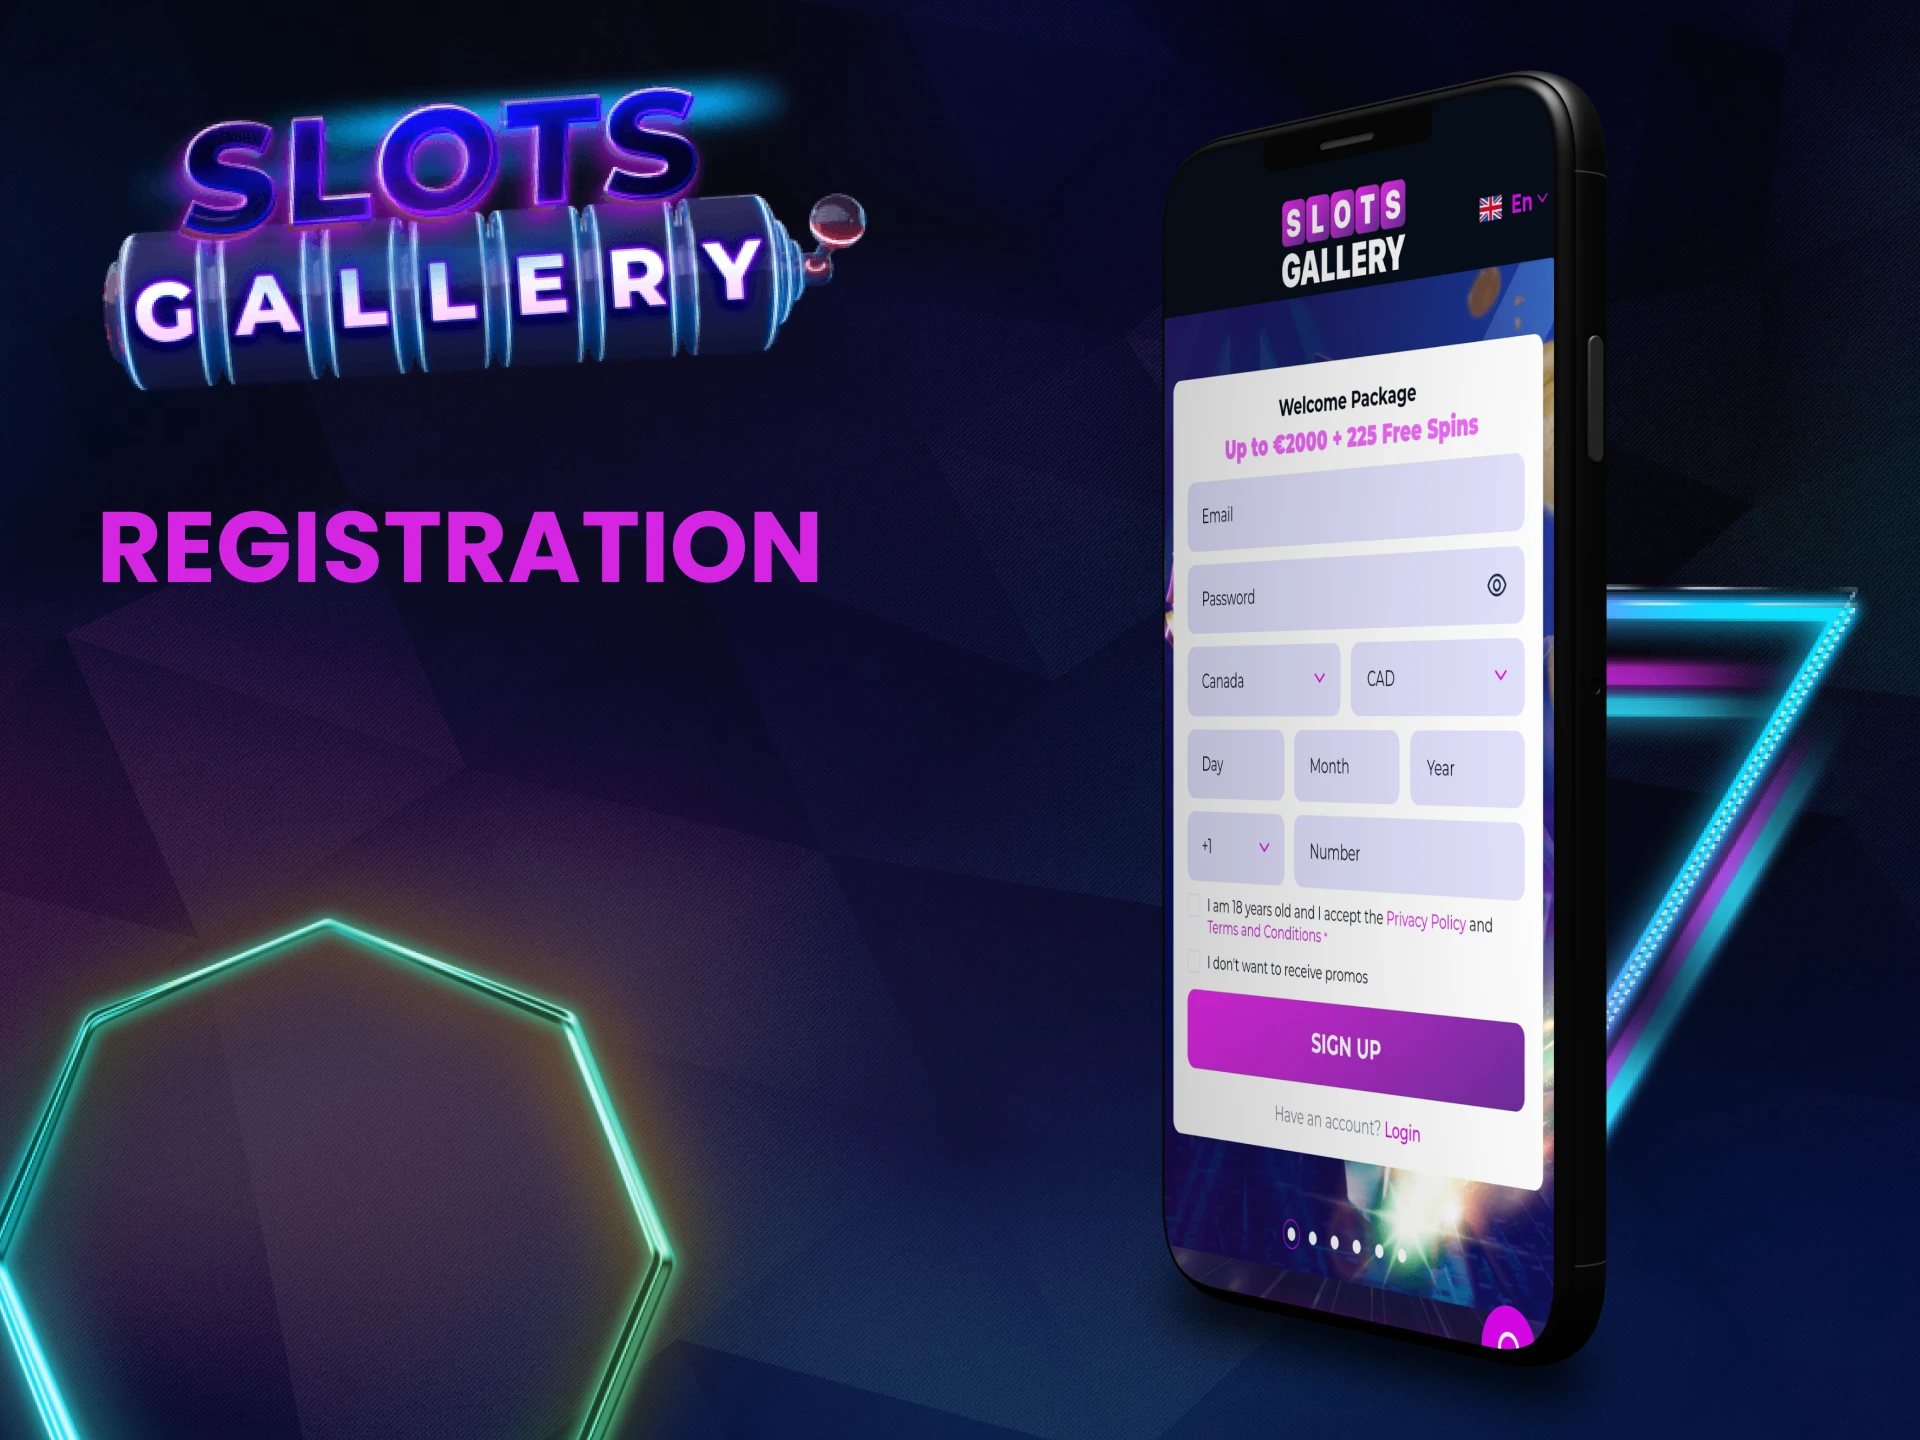 You can register in the SlotsGallery application.